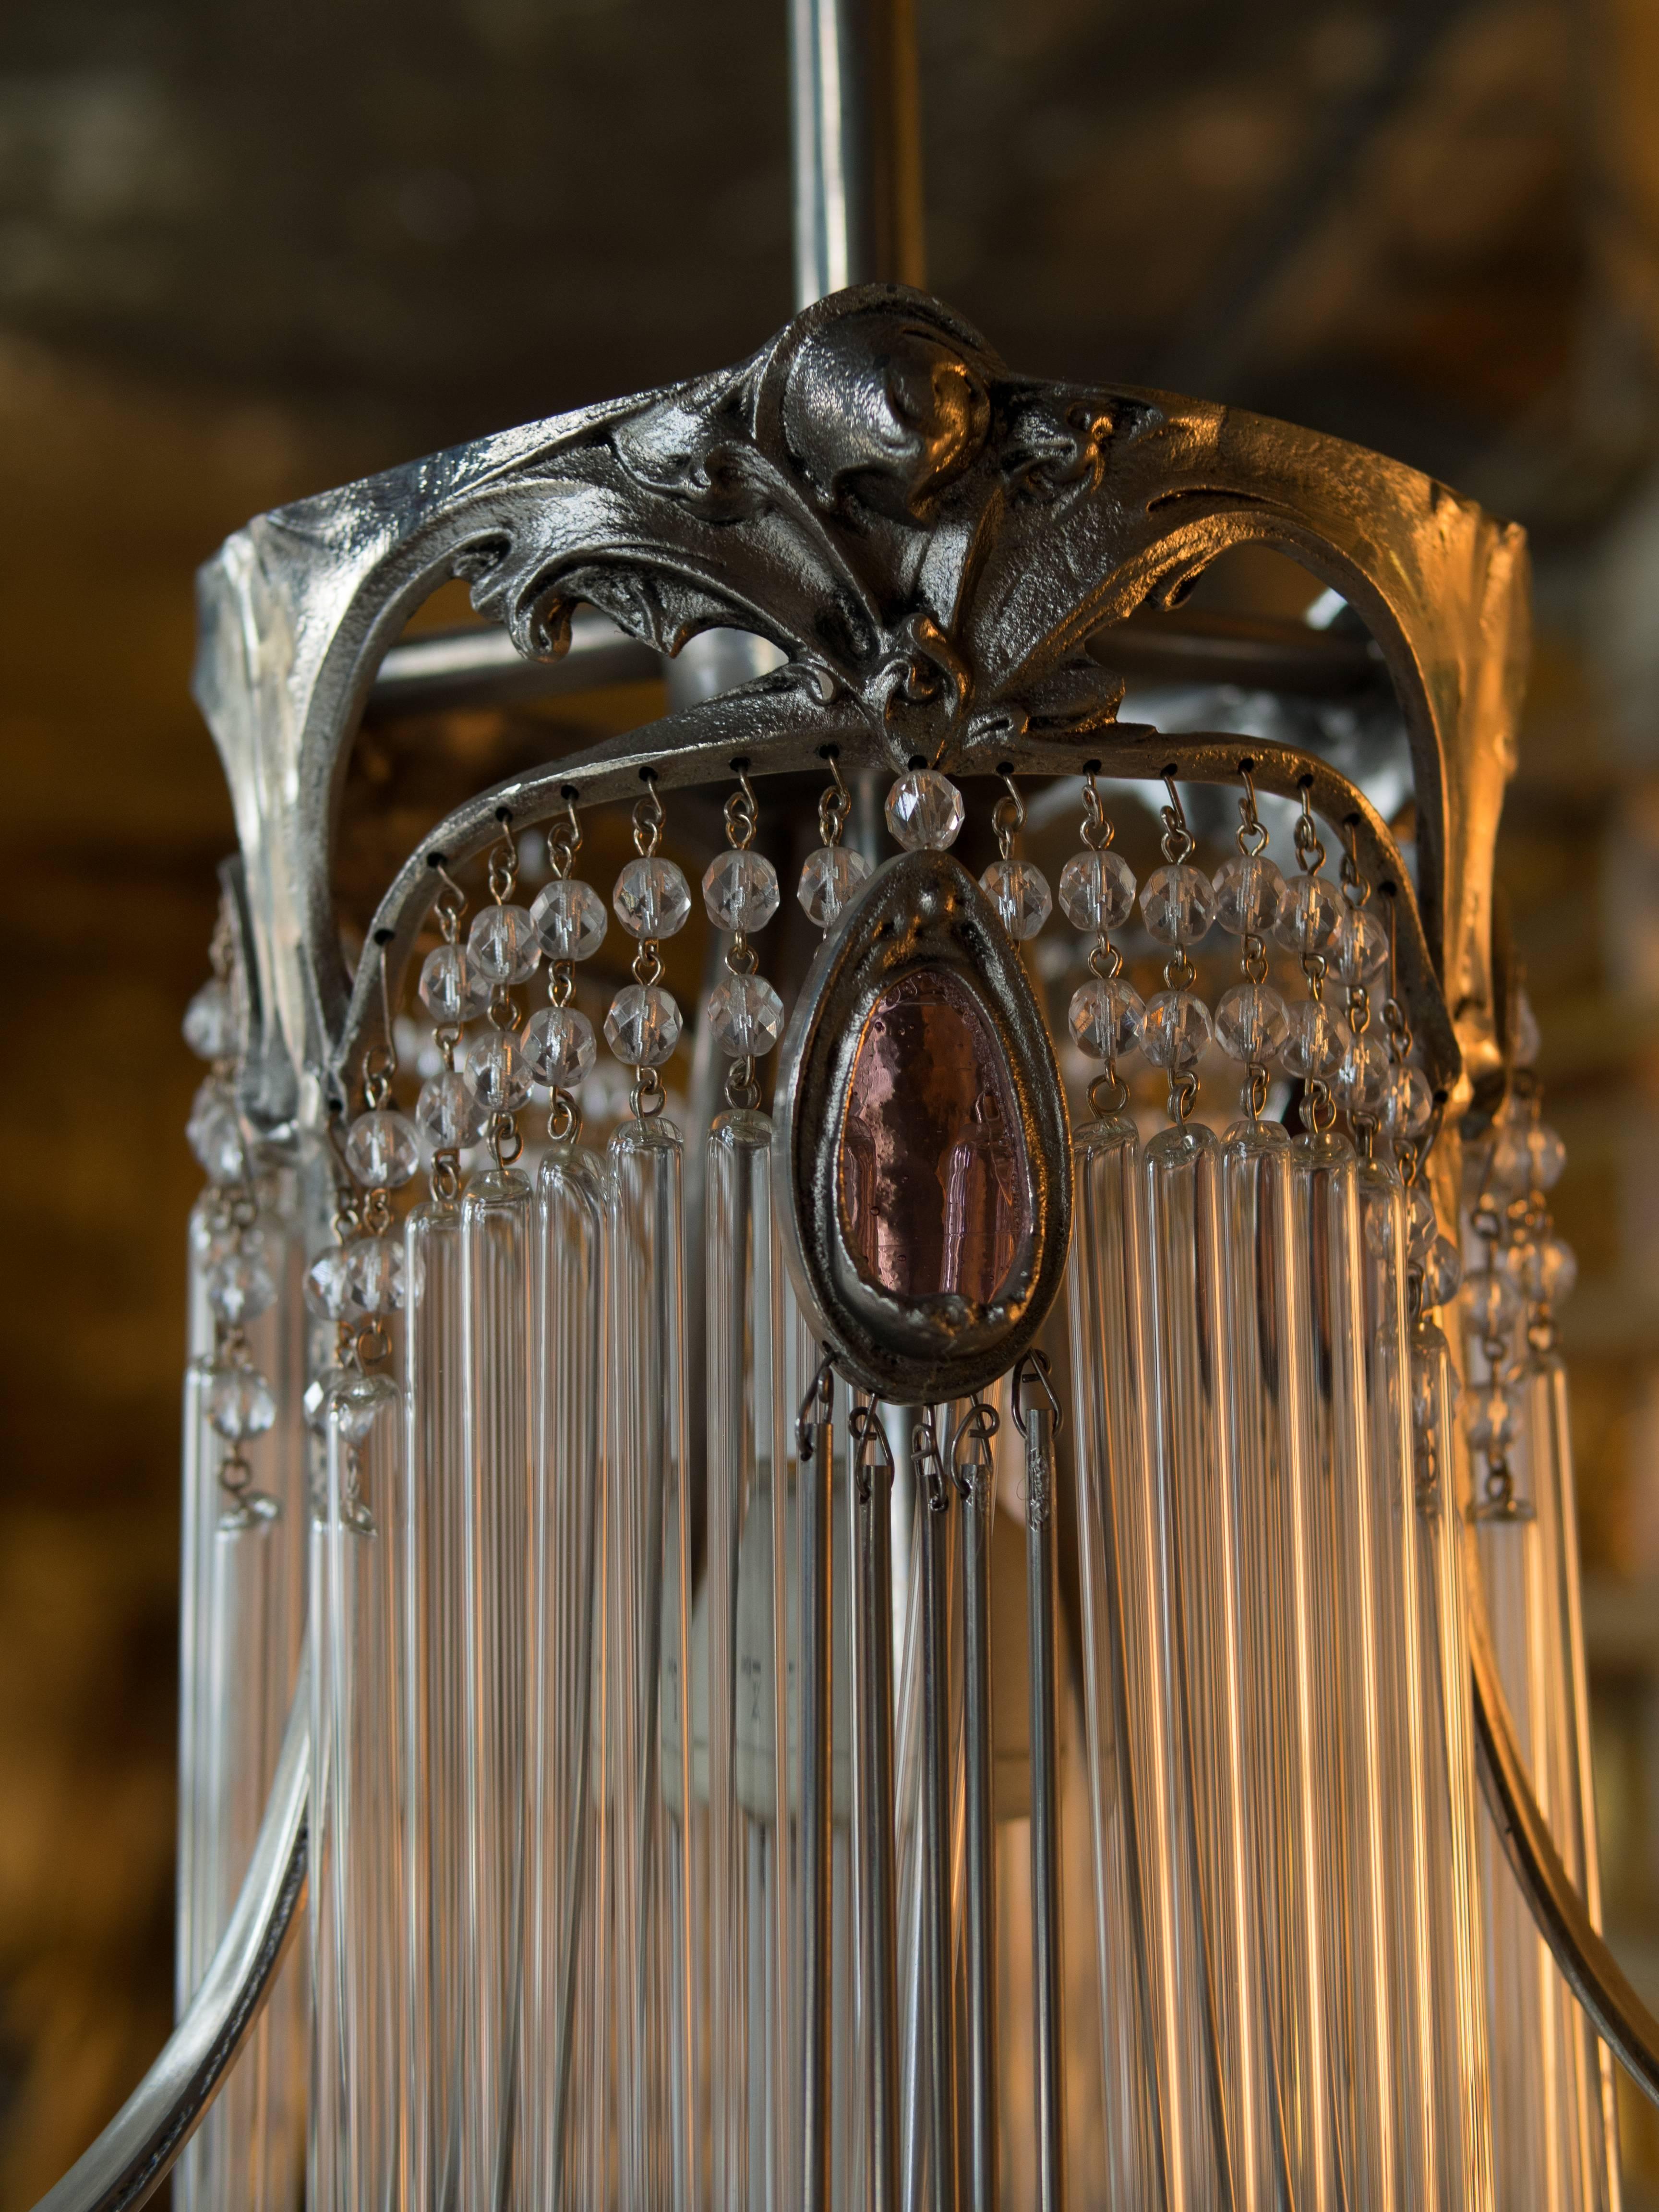 Art Nouveau chandelier from Hector Guimard. Bronze with patinated nickel finish and purple glasses (lie de vin).